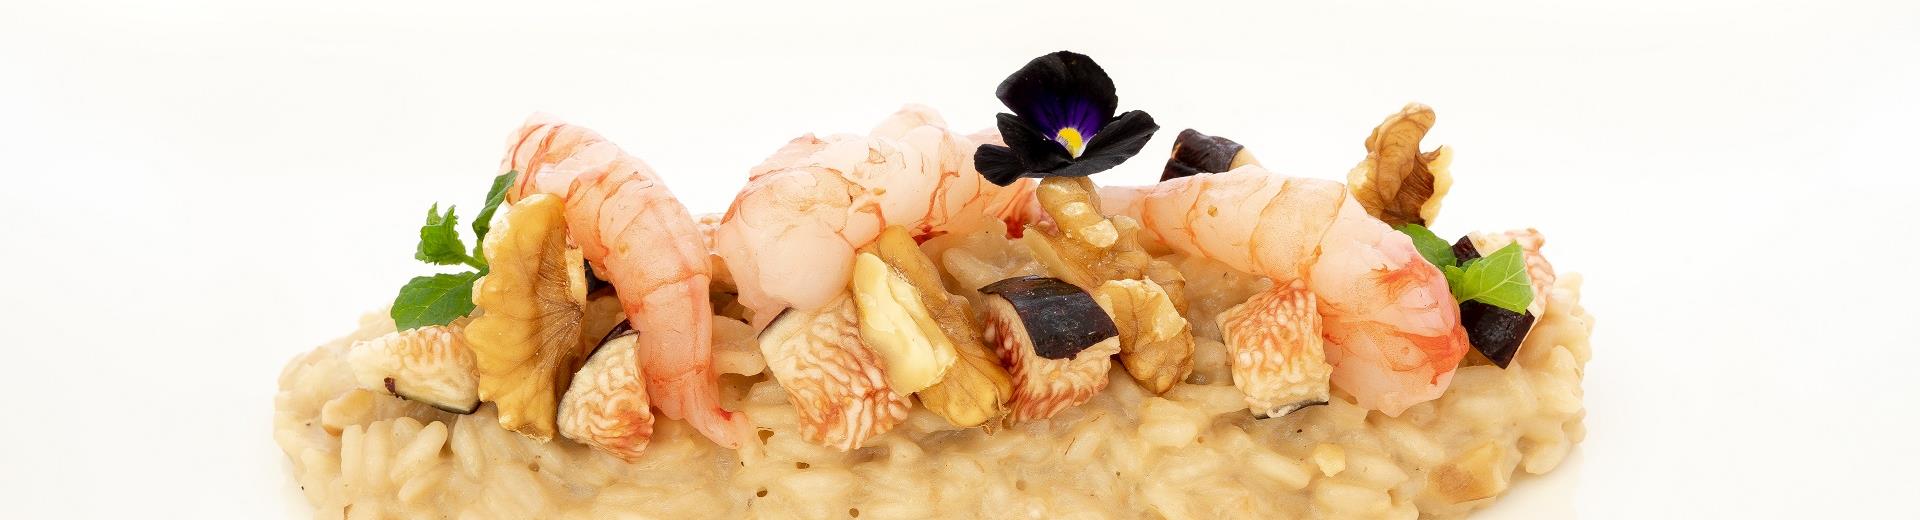 Try our Pecan shrimp risotto and figs: stay at BW Plus Hotel Perla del Porto